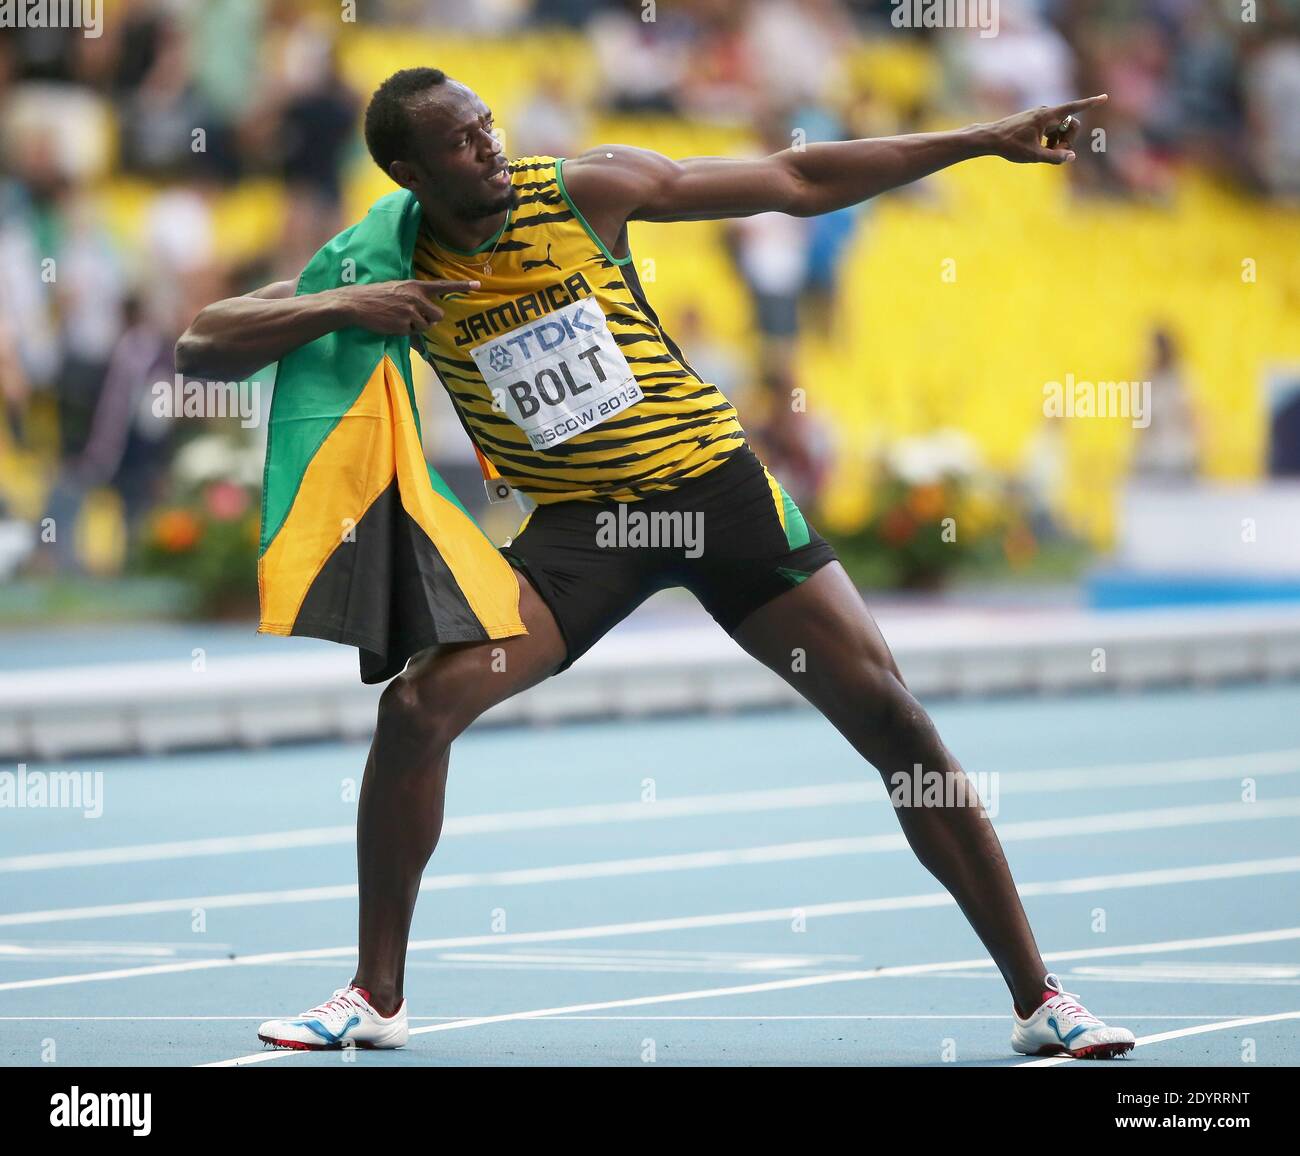 Usain Bolt of Jamaica celebrates after winning the men's 200m final at the 14th IAAF World Championships in Athletics at Luzhniki Stadium in Moscow, Russia, 17 August 2013. Photo by Giuliano Bevilacqua/ABACAPRESS.COM Stock Photo